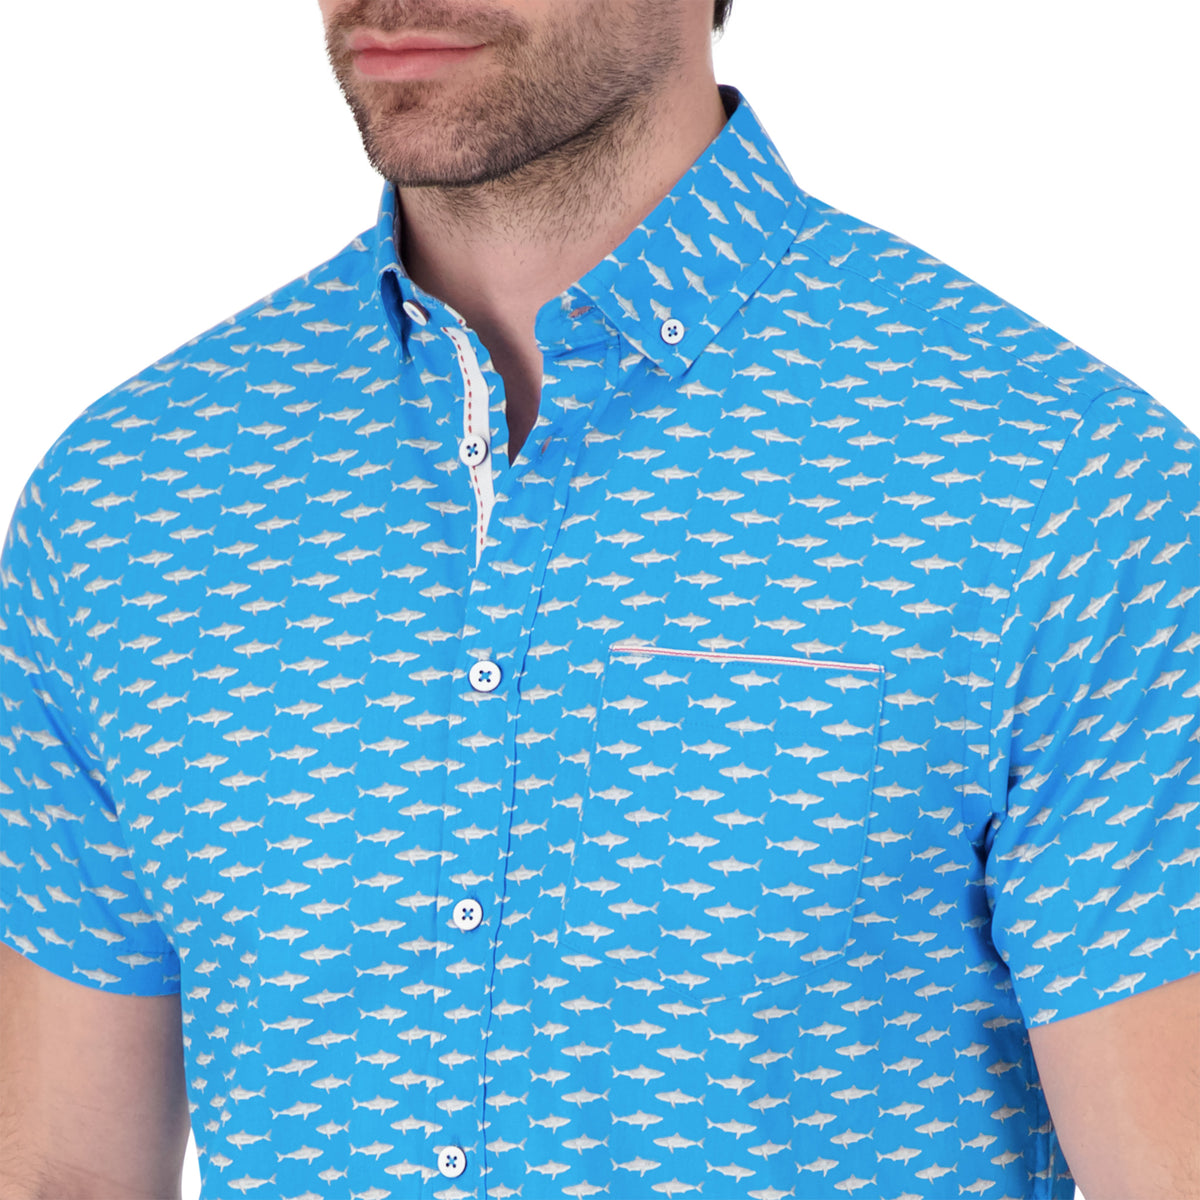 Model Front Up Close View of Short Sleeve Shirt with Shark Print in Blue